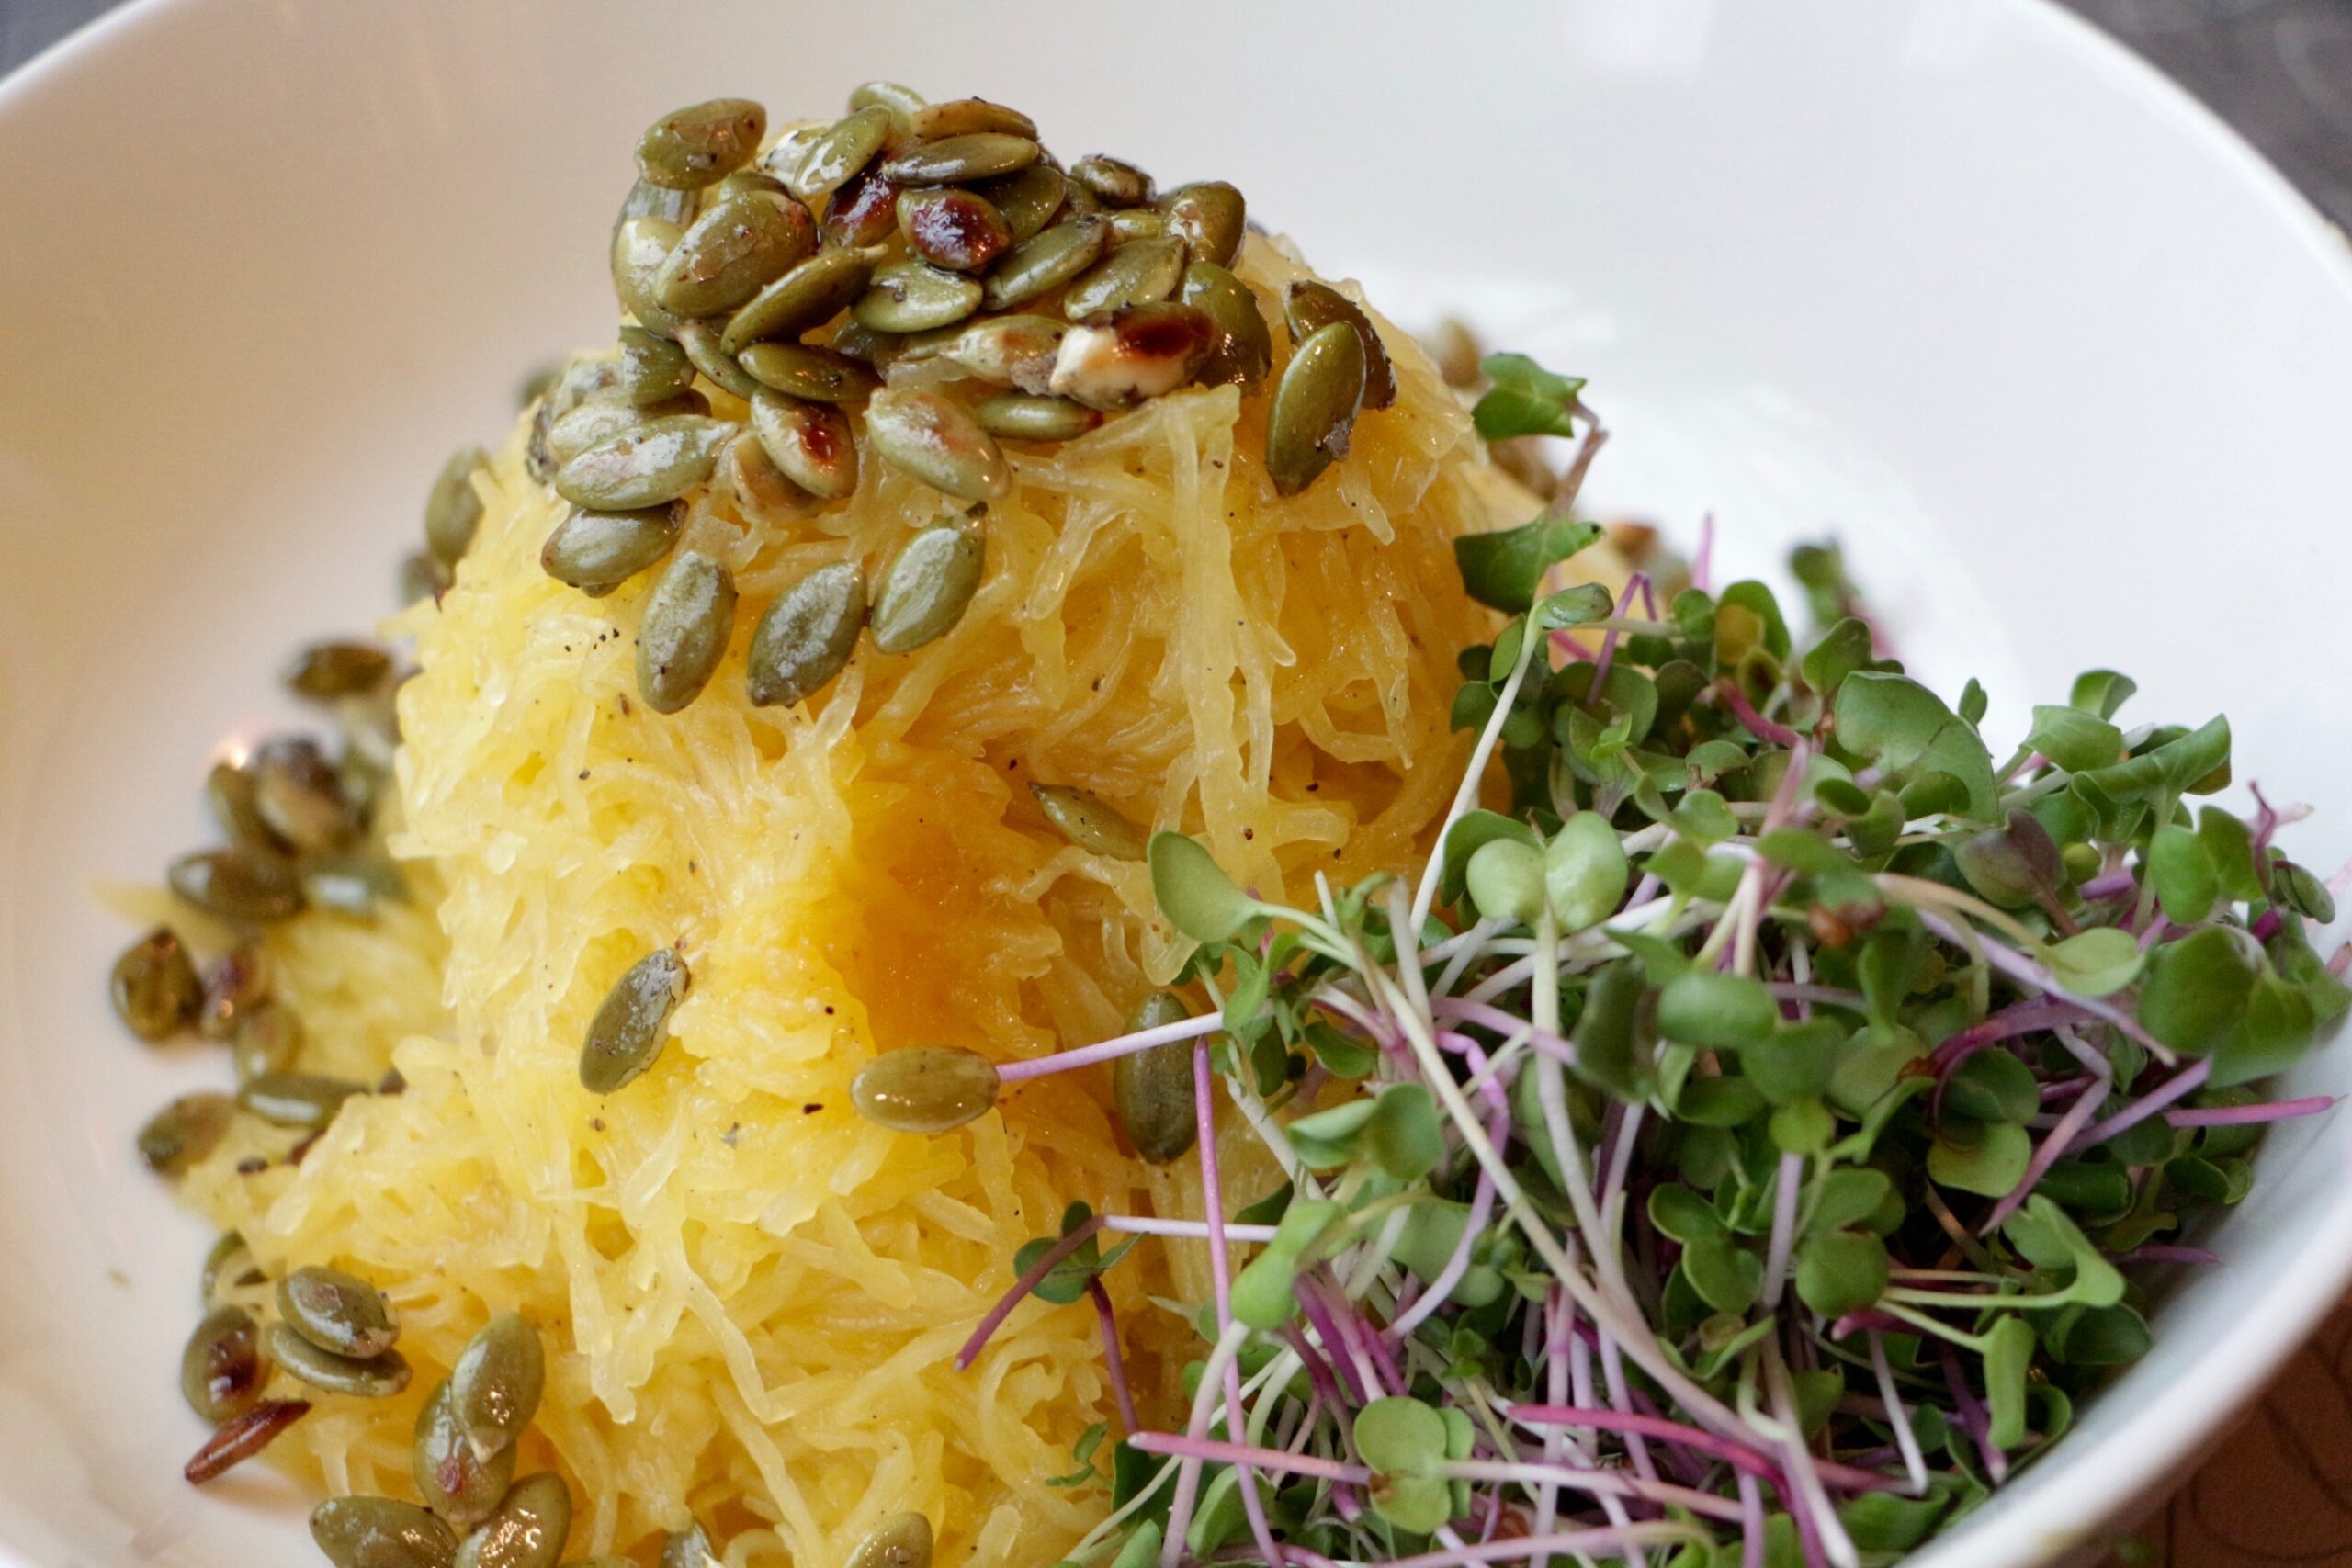 Spaghetti Squash and microgreens with toasted pumpkin seeds on top.